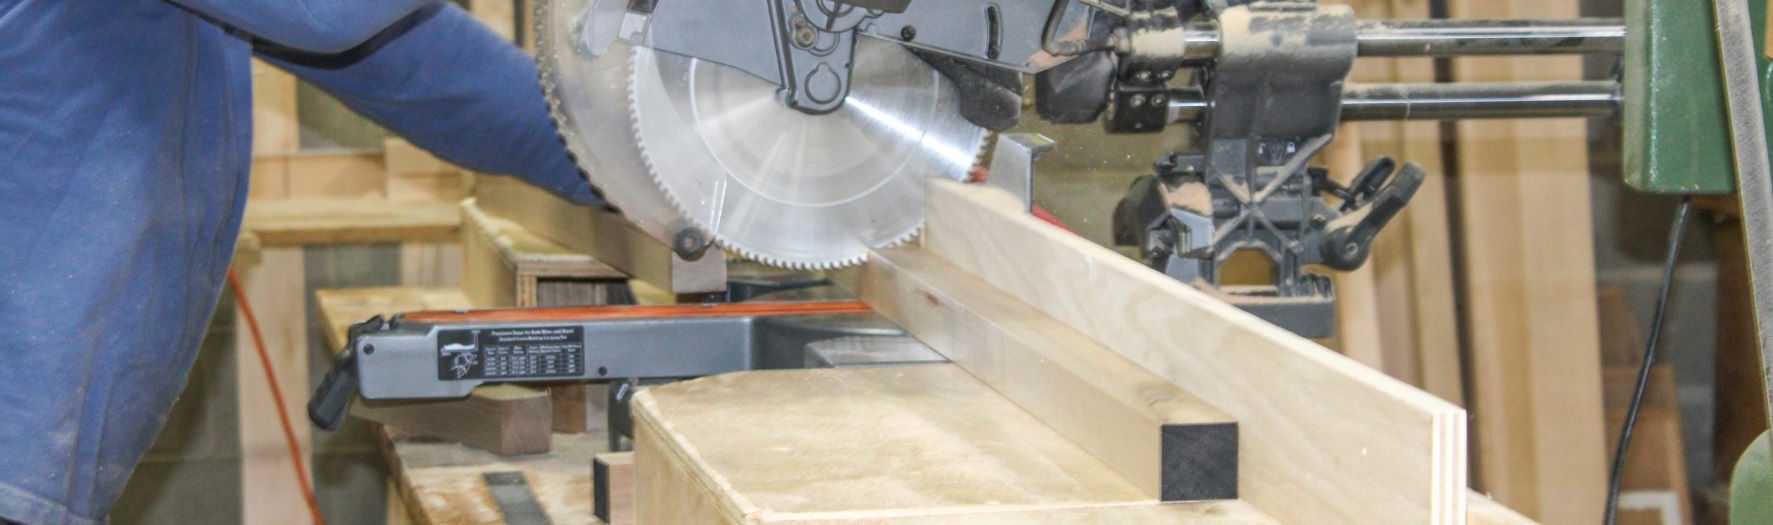 Wood moving through cutter in casegoods manufacturing facility.